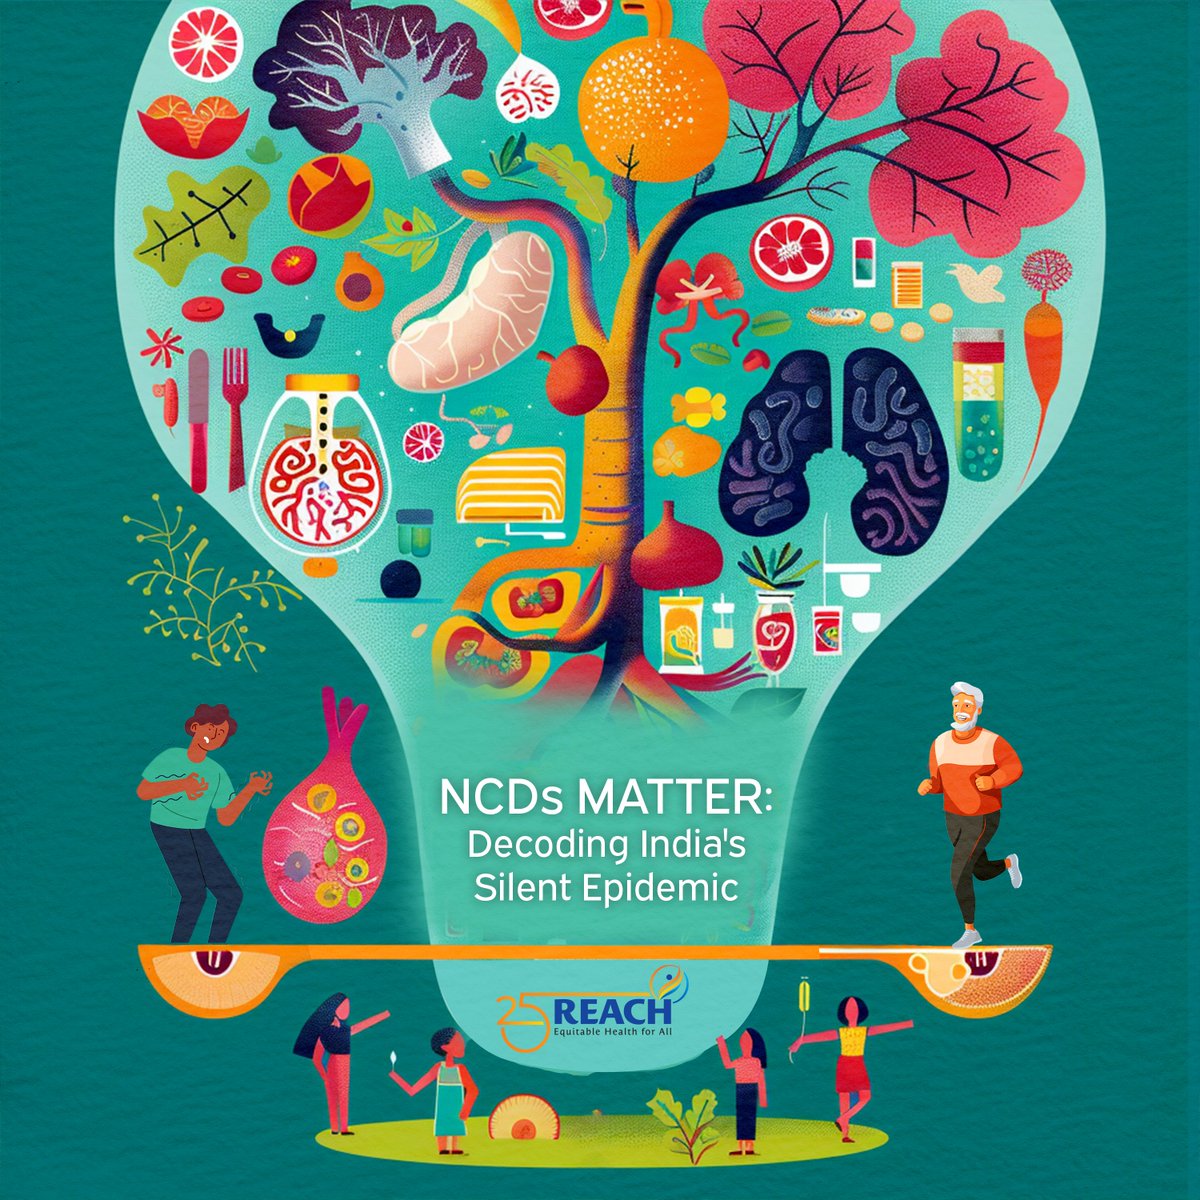 This #WorldHealthDay we’re excited to announce our new podcast mini-series on NCDs in partnership with @SunoIndia_in Join us for 6 info-packed eps where we break down Big 5 NCDs: cardiovascular & hypertension; cancers; chronic respiratory; diabetes; mental health Stay tuned🎙️